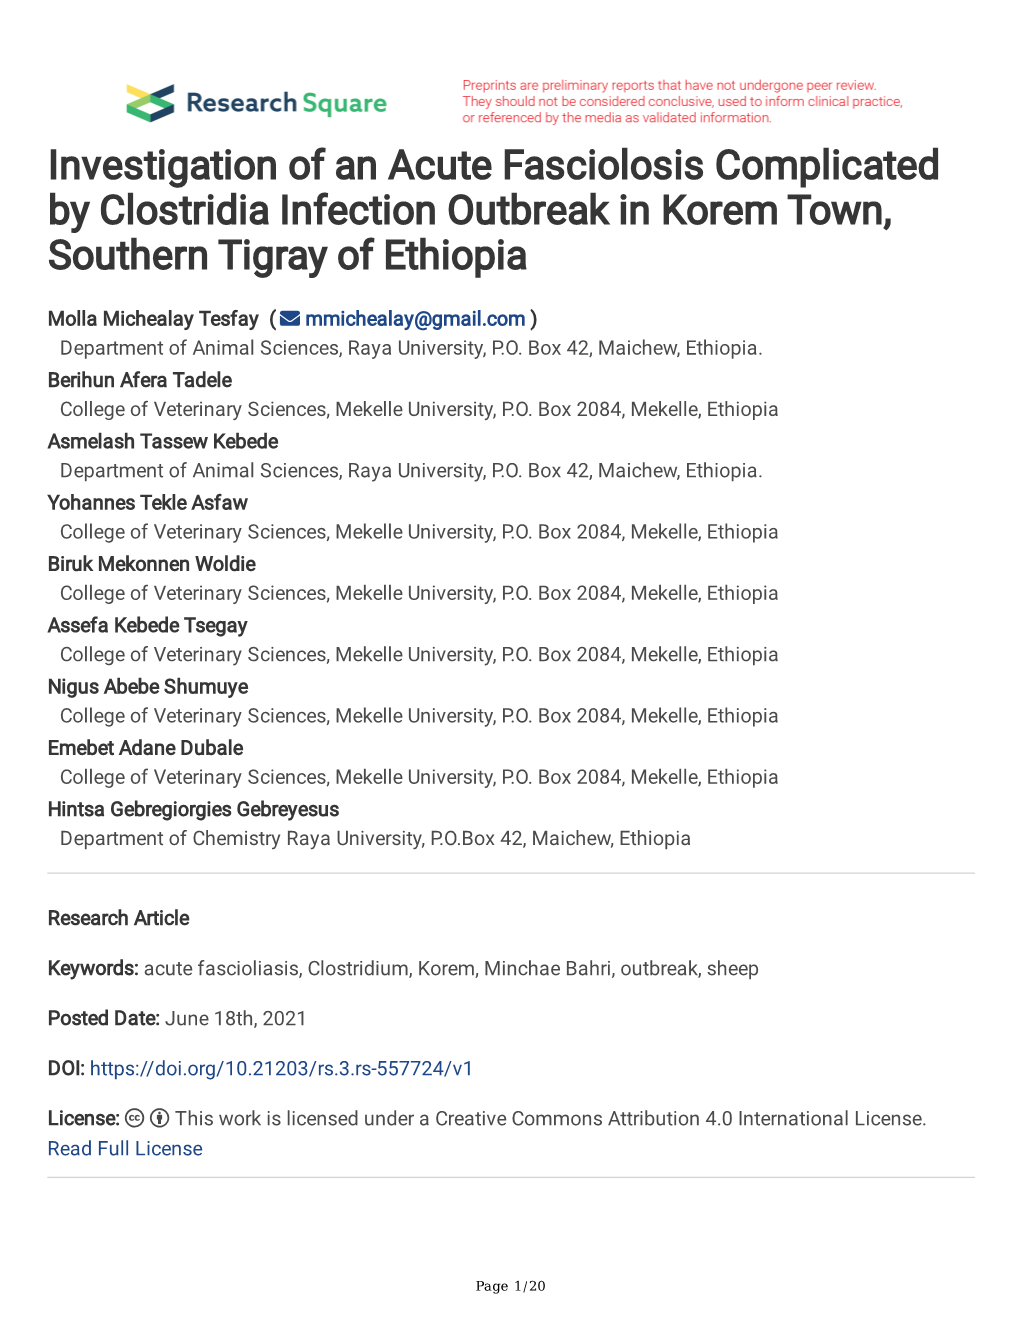 Investigation of an Acute Fasciolosis Complicated by Clostridia Infection Outbreak in Korem Town, Southern Tigray of Ethiopia